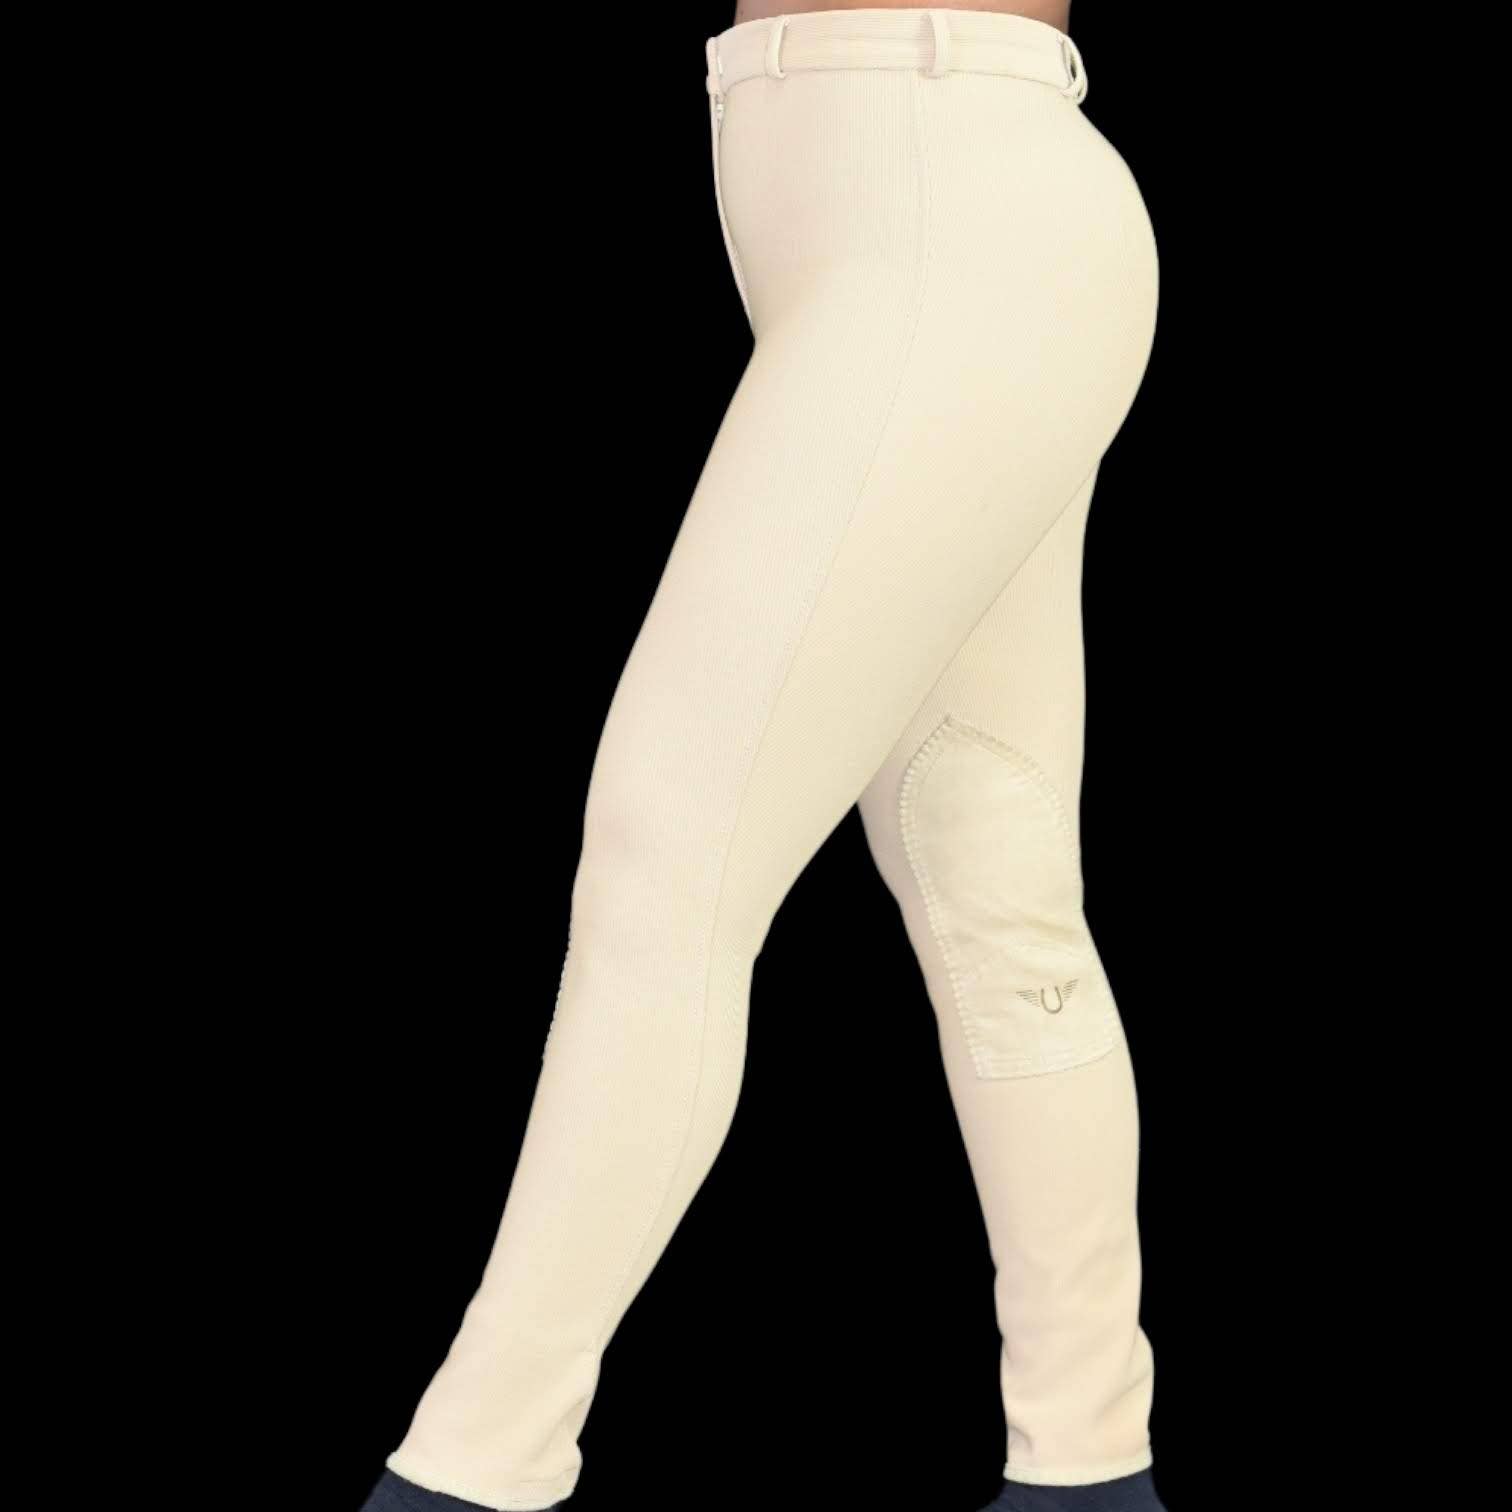 Tuffrider Riding Pants Tan Ribbed Knee Patch Breeches Sock Bottom Size 26 Womens Equestrian